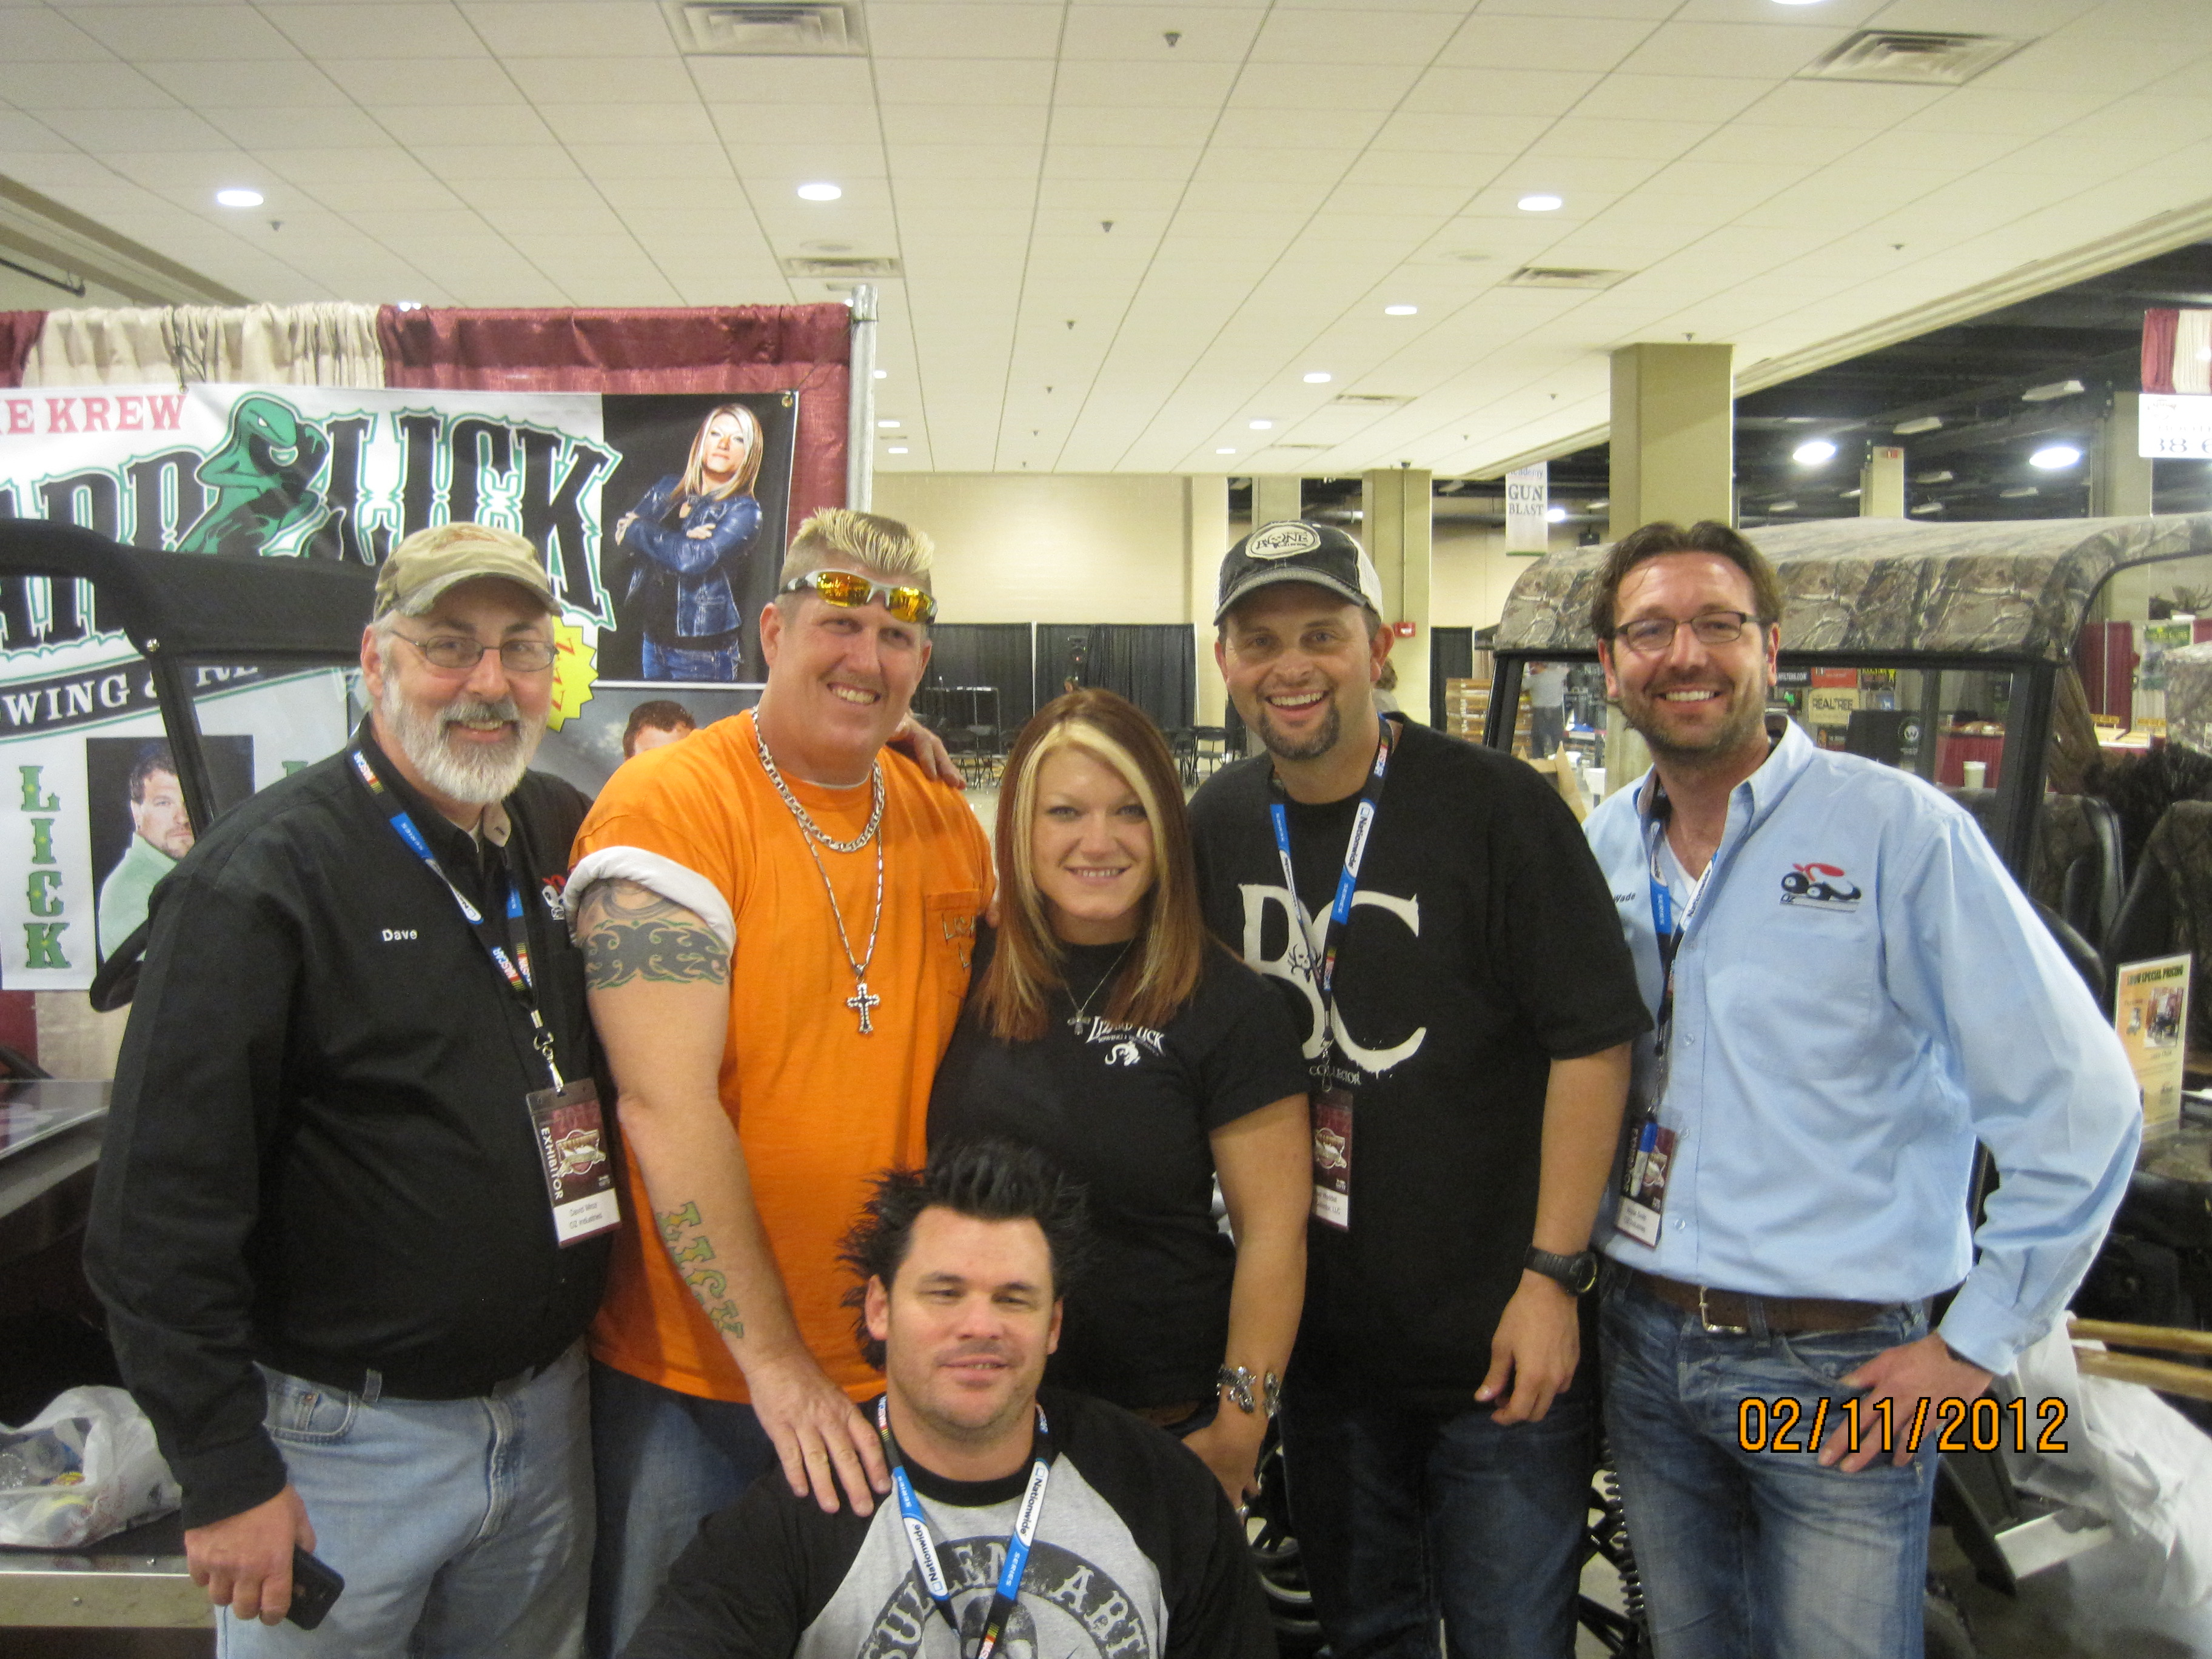 Hanging out with the Lizard Lick Towing crew in Nashville. Left to right David Mroz, Ron Shirley, Amy Shirley, Michael Waddell, Wm. Wade Smith and the world famous DJ Silver below.